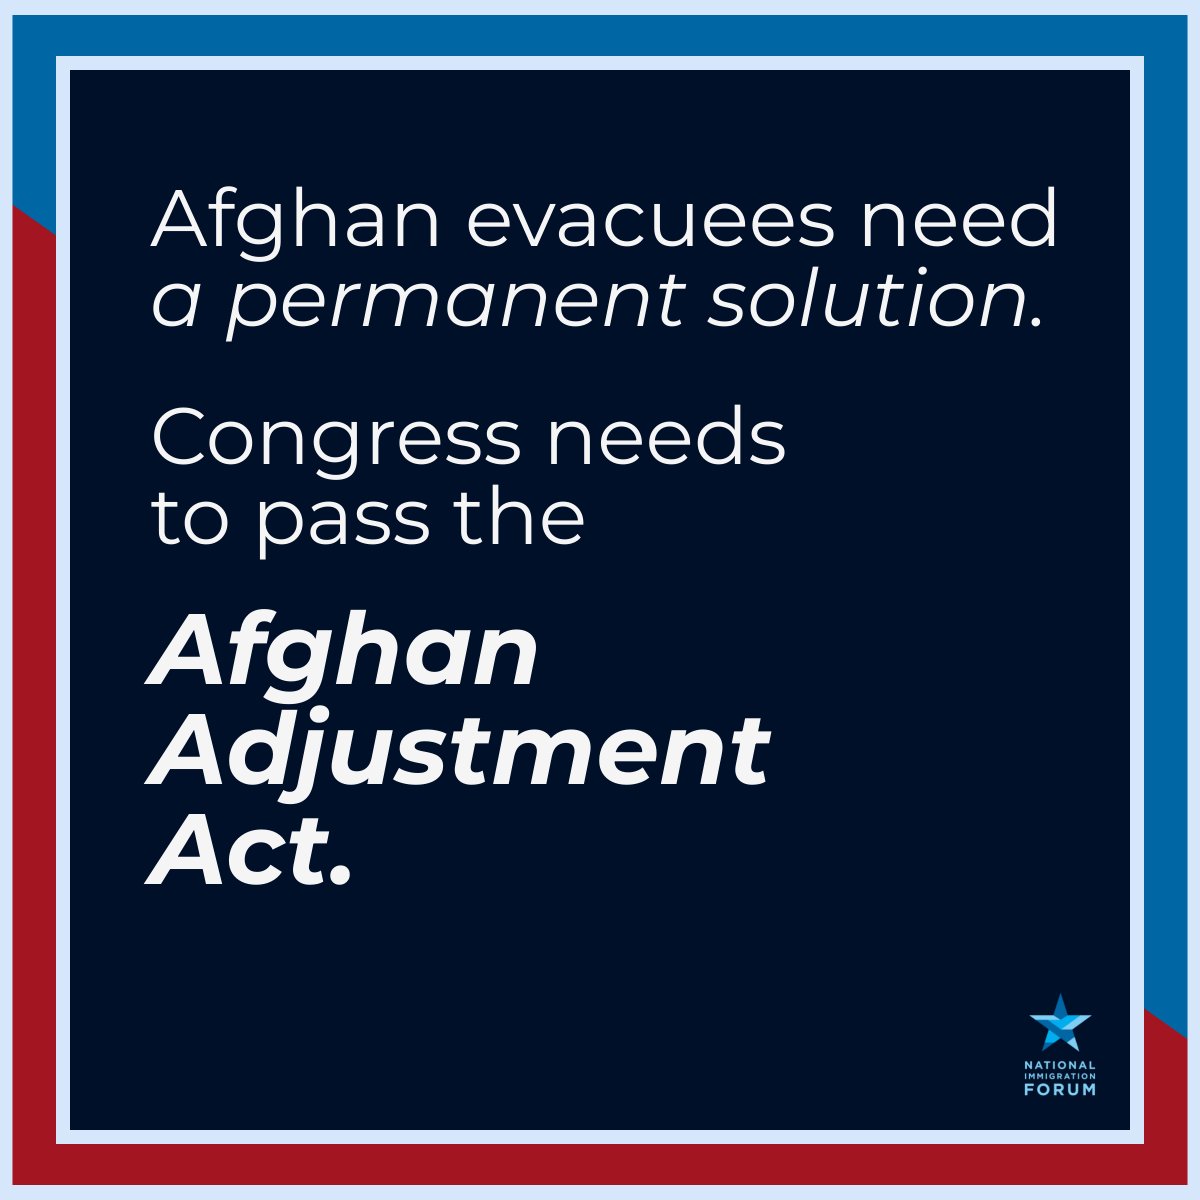 dark blue background with a blue and red border that reads "Afghan evacuees need a permanent solution. Congress must pass the Afghan Adjustment Act."